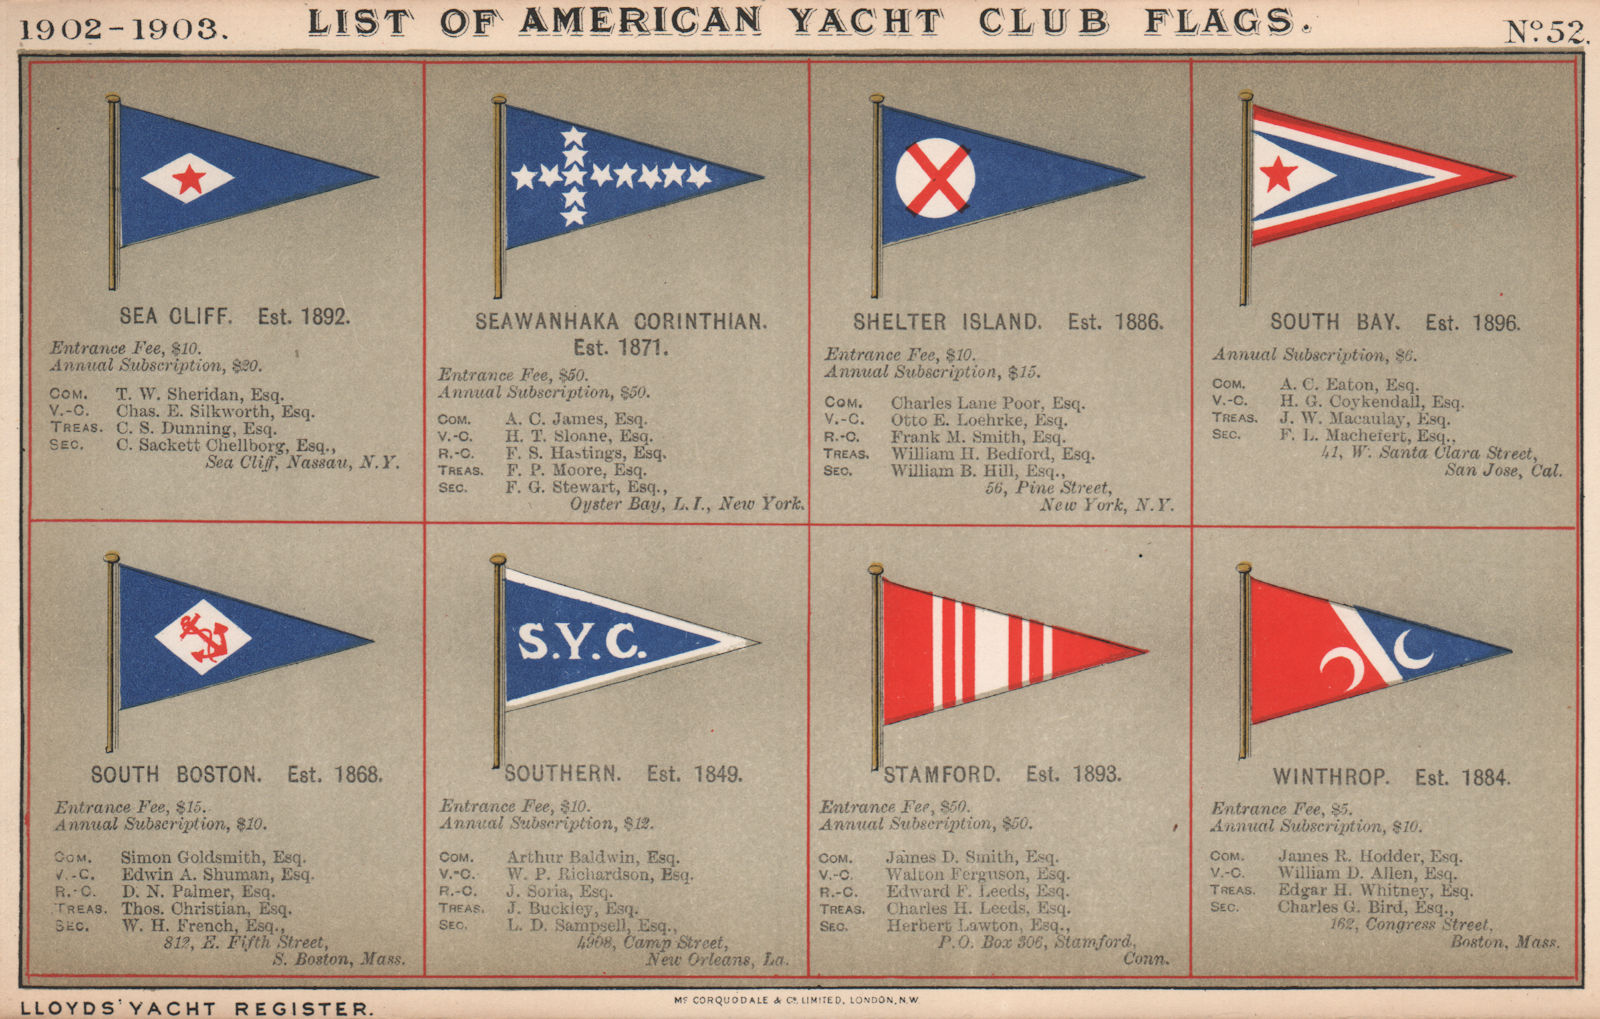 US YACHT CLUB FLAGS S-W. Sea Cliff South Bay Southern Stamford Winthrop 1902